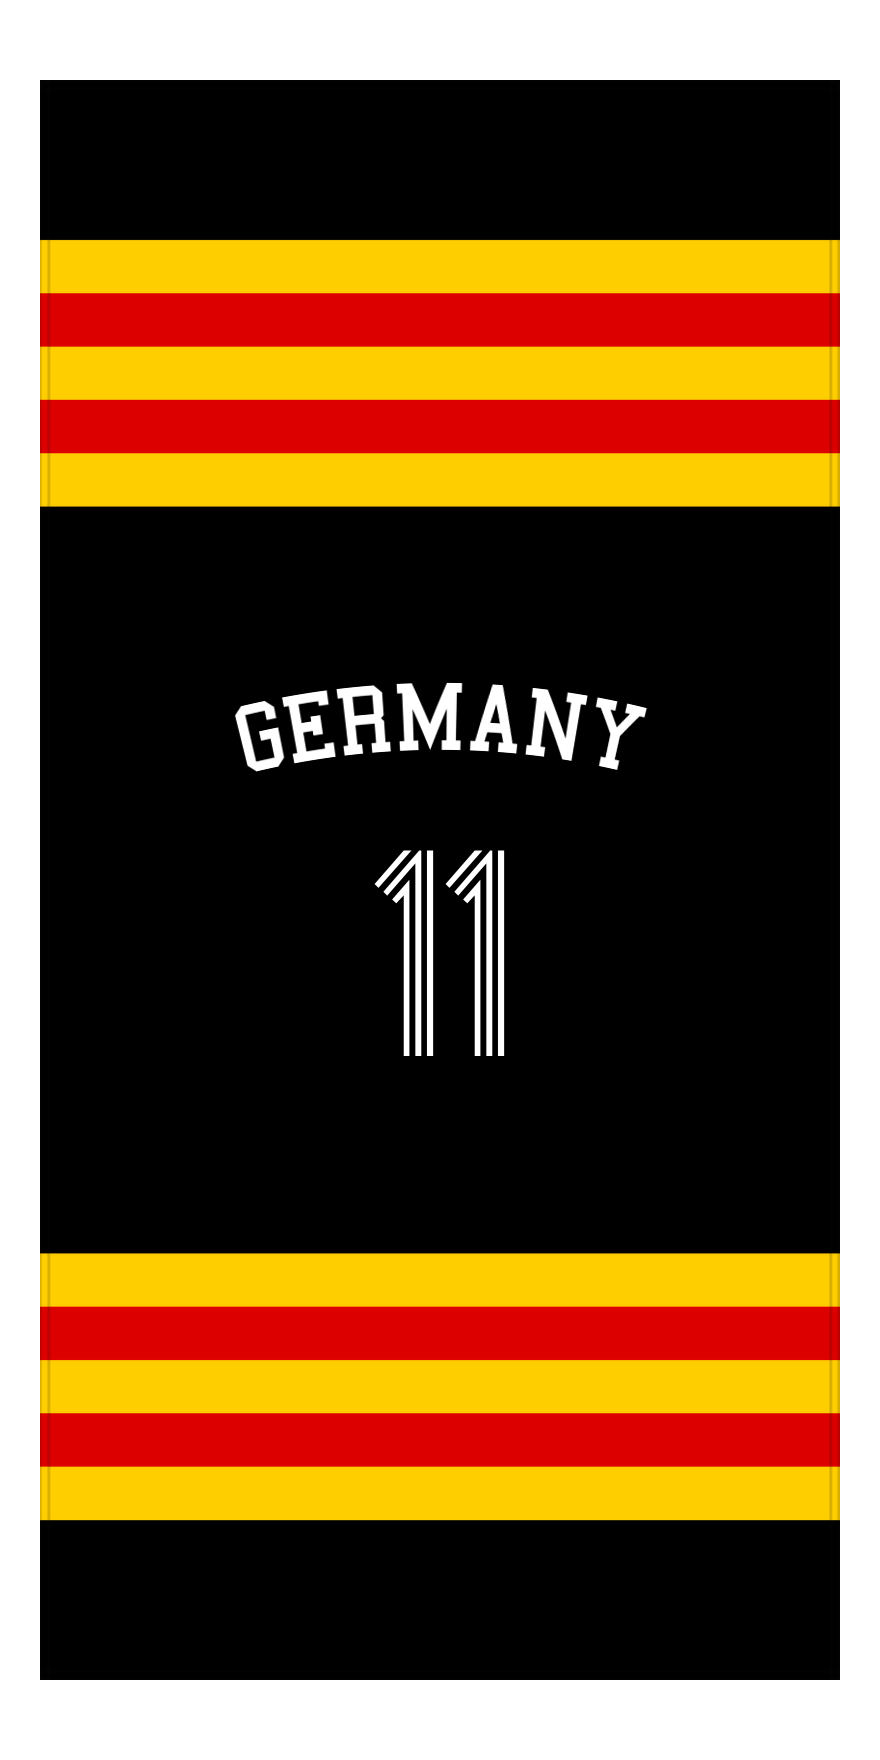 Personalized Jersey Number 2-on-1 Stripes Sports Beach Towel with Arched Name - Germany - Vertical Design - Front View